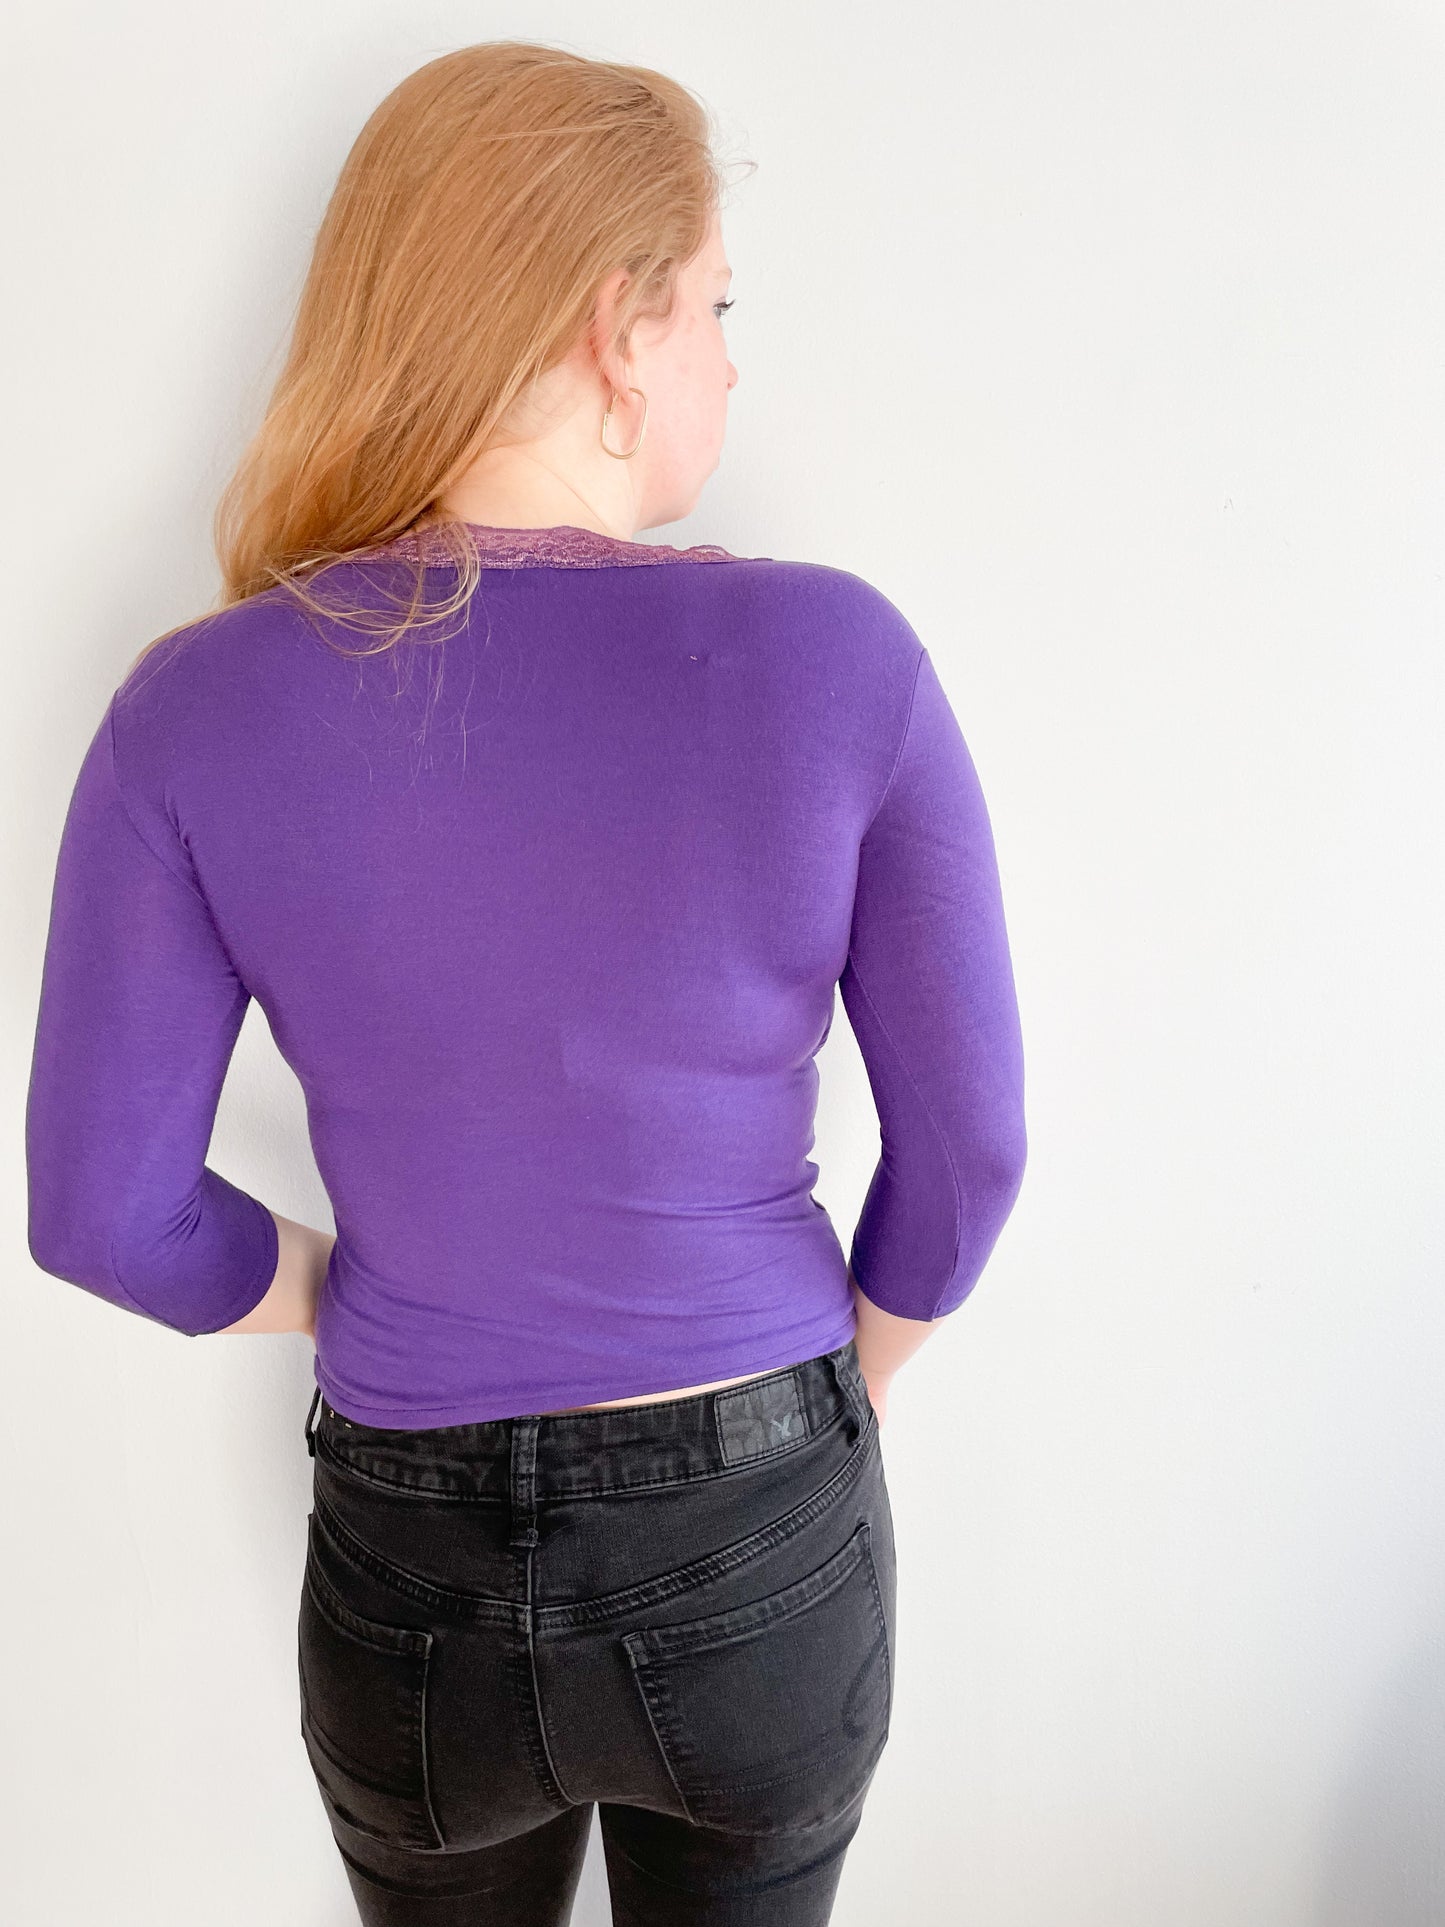 Purple Lace Wrap Style Cropped 3/4 Sleeve Top - S/M